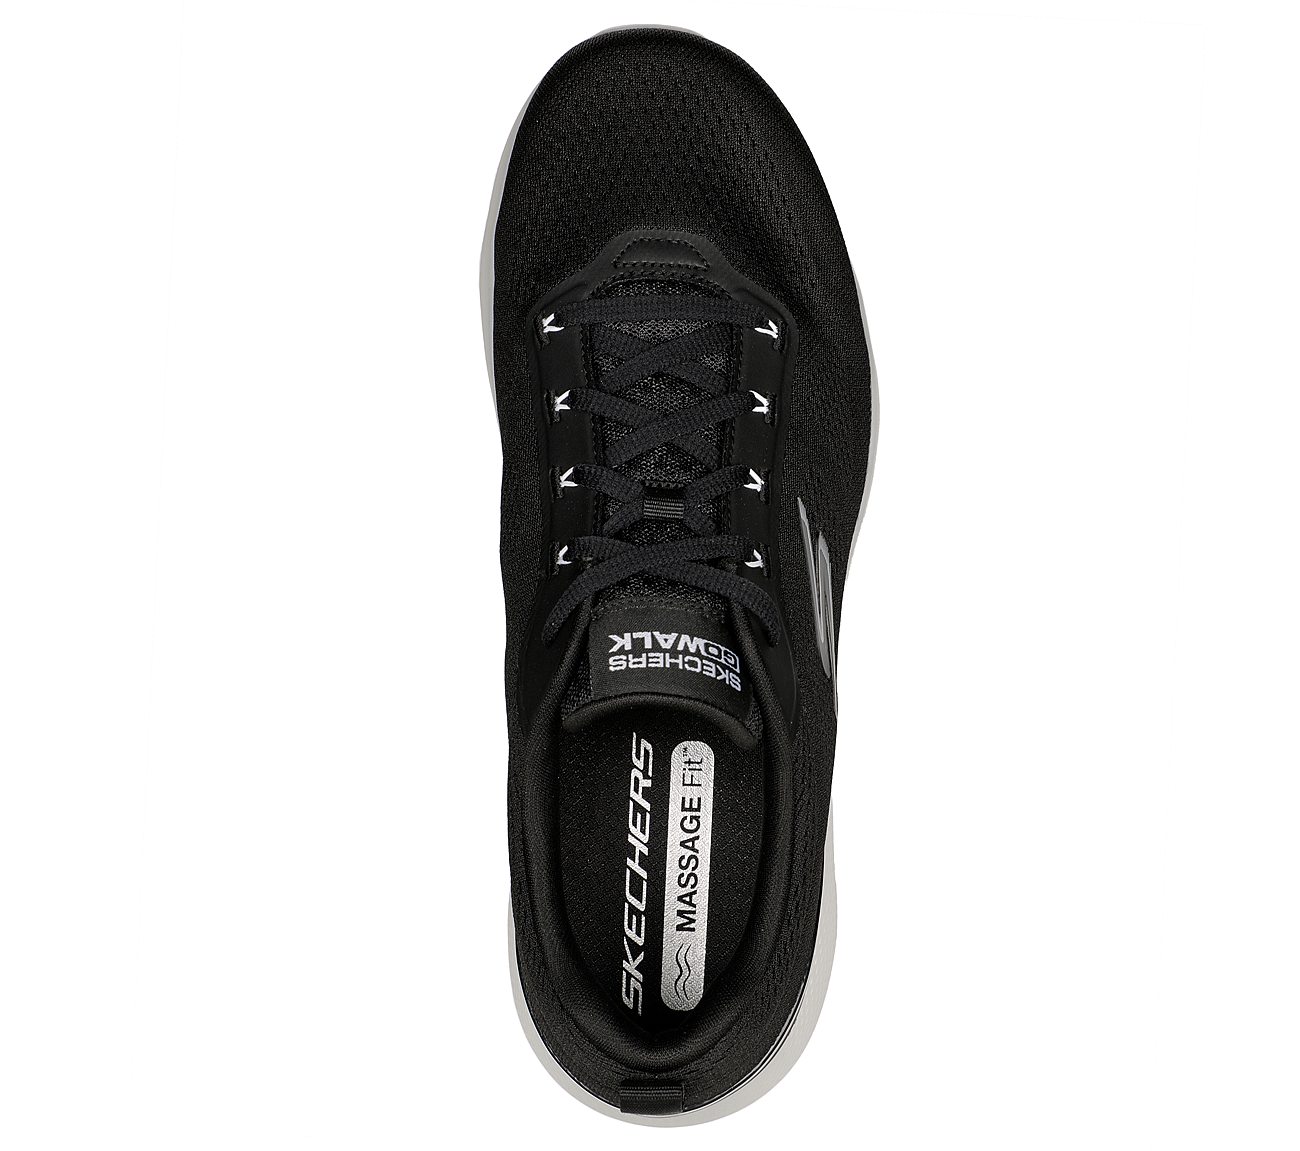 Skechers Black/White Go Walk Massage Fit Mens Lace Up Shoes - Style ID ...